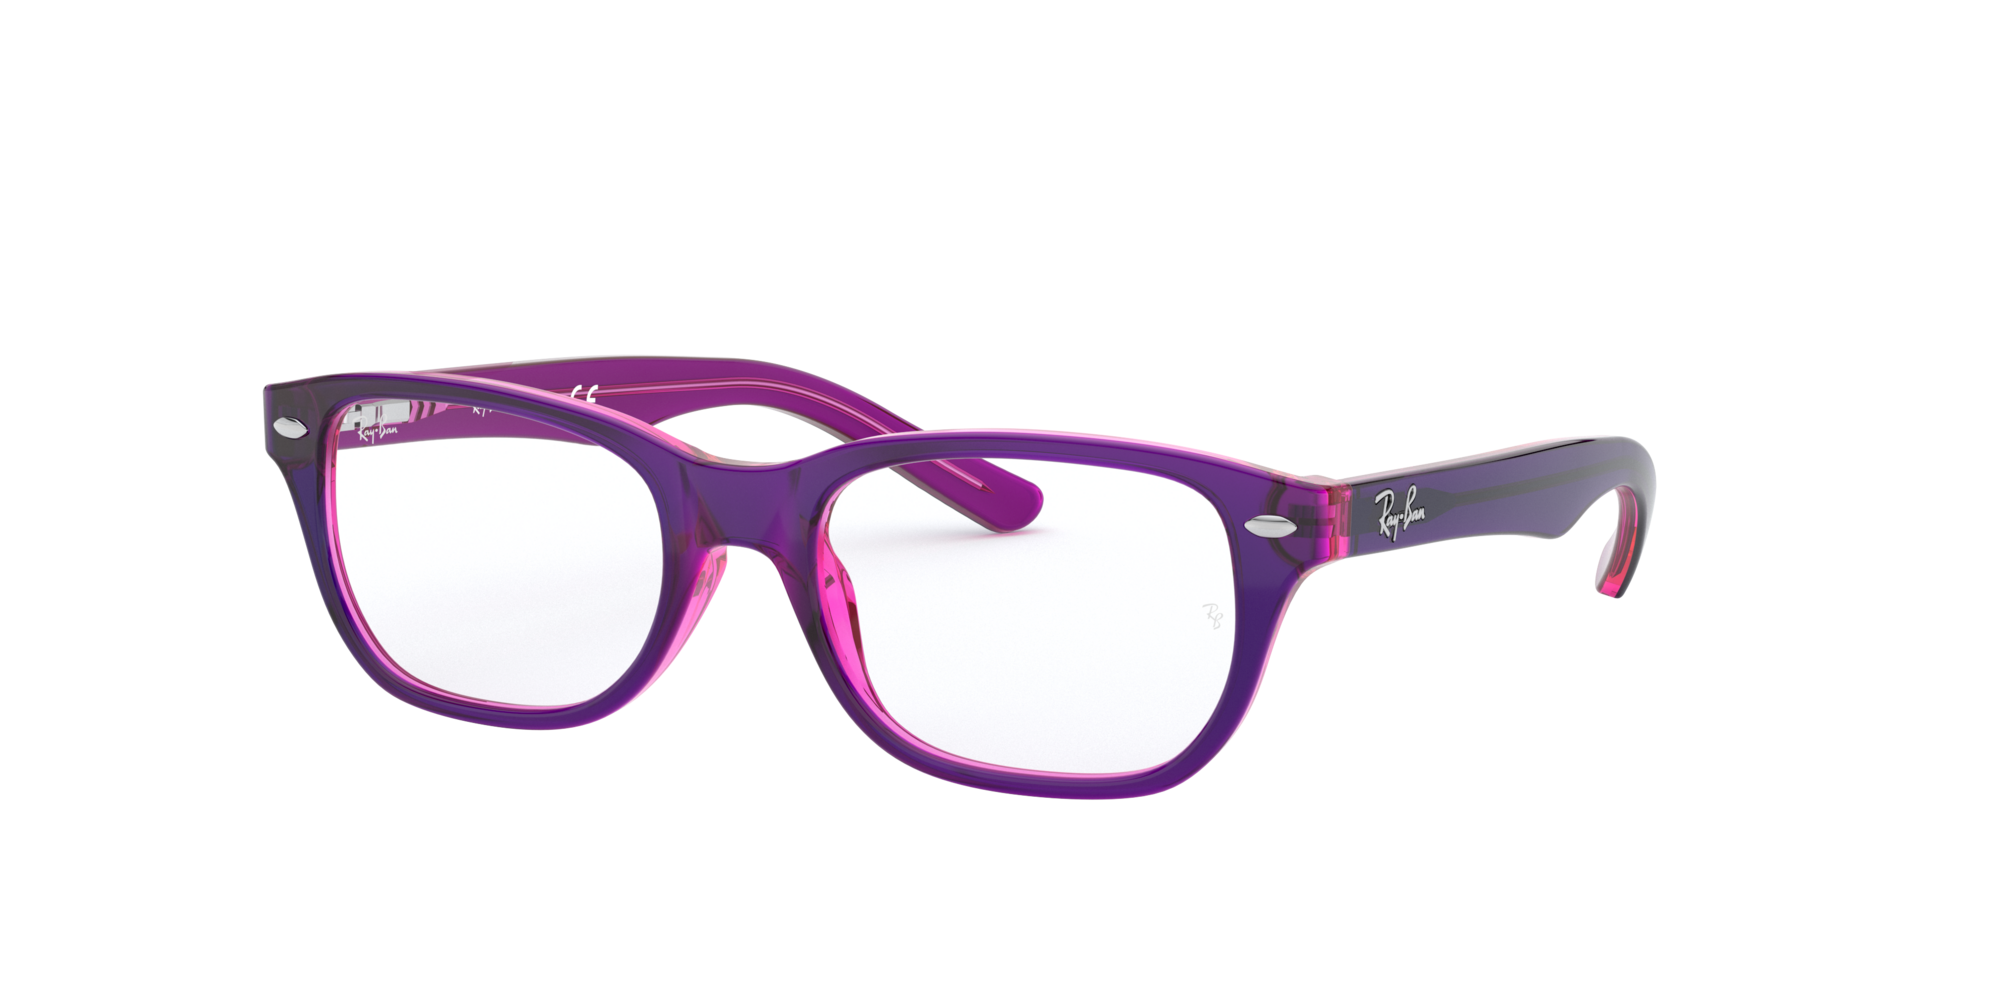 Ray Ban Jr 0ry1555 Glasses In Pink Purple Target Optical